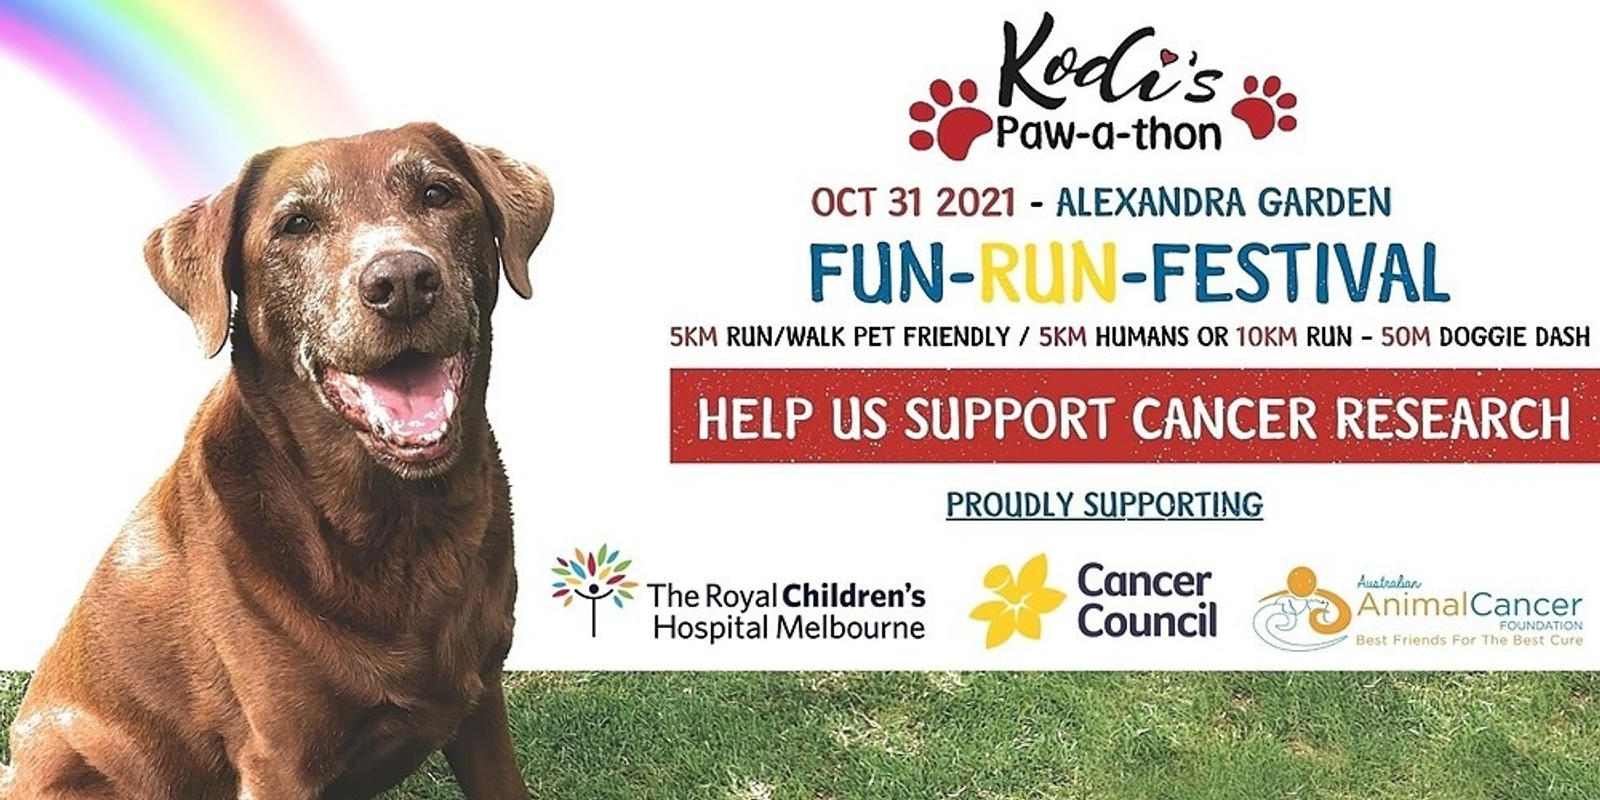 Banner image for Kodi's Paw-a-Thon - Fun Run/Walk, Pet Friendly event, Live entertainment, Food trucks, Market stalls, Rescue Dogs for Adoption